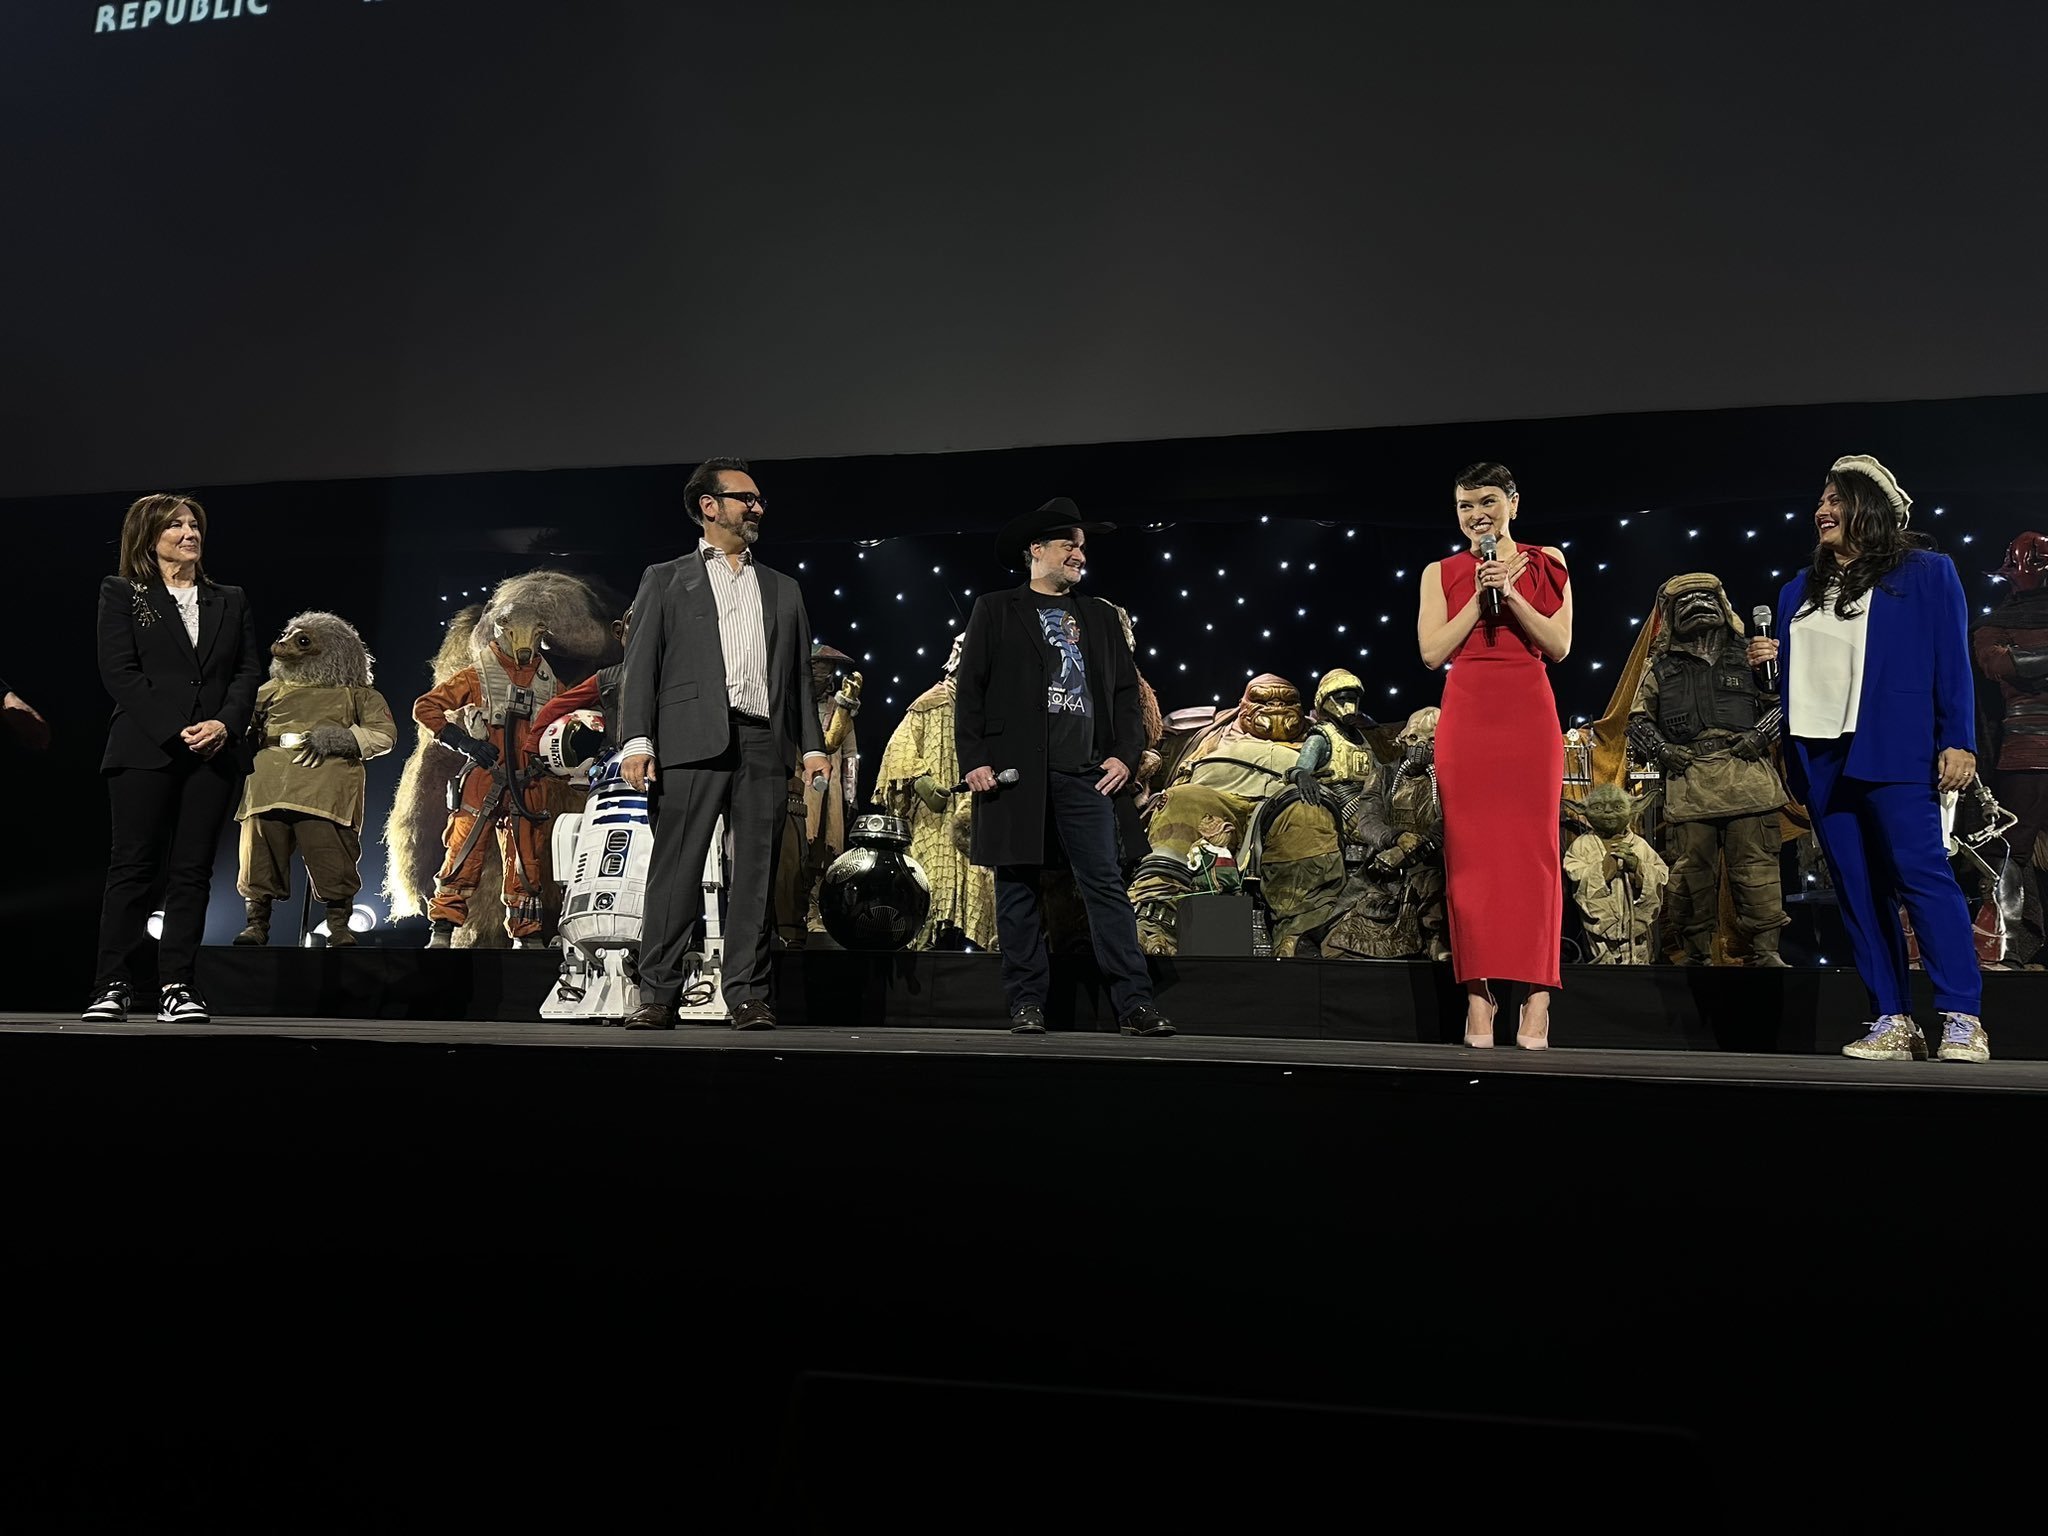 Kathleen Kennedy, James Mangold, Dave Filoni, and Sharmeen Obaid-Chinoy welcome Daisy Ridley